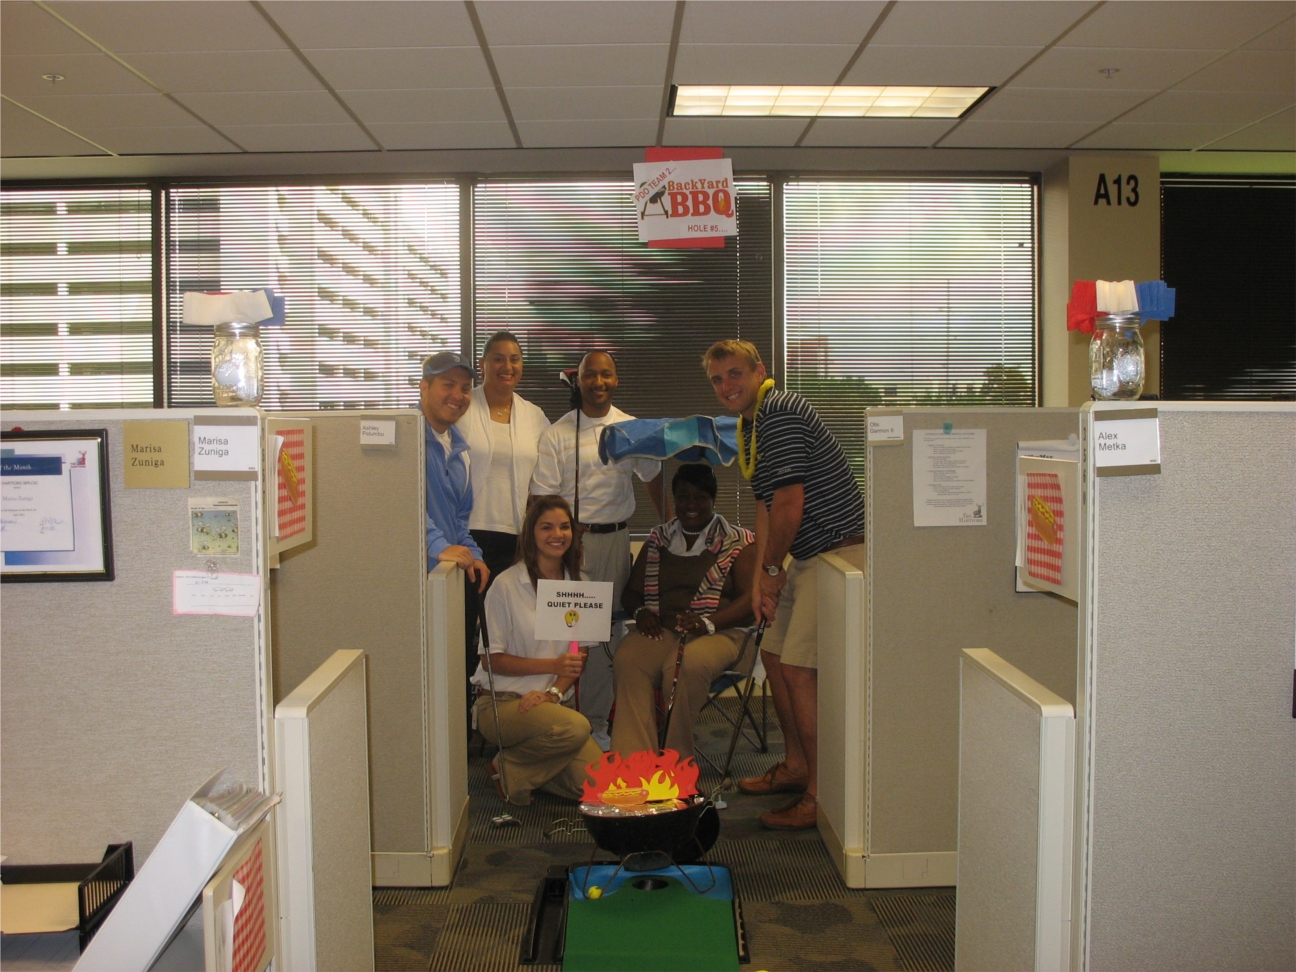 Employees at The Hartford’s Tampa office transformed the office into a miniature golf course. This was a team building event that provided employees the chance to network with each other.